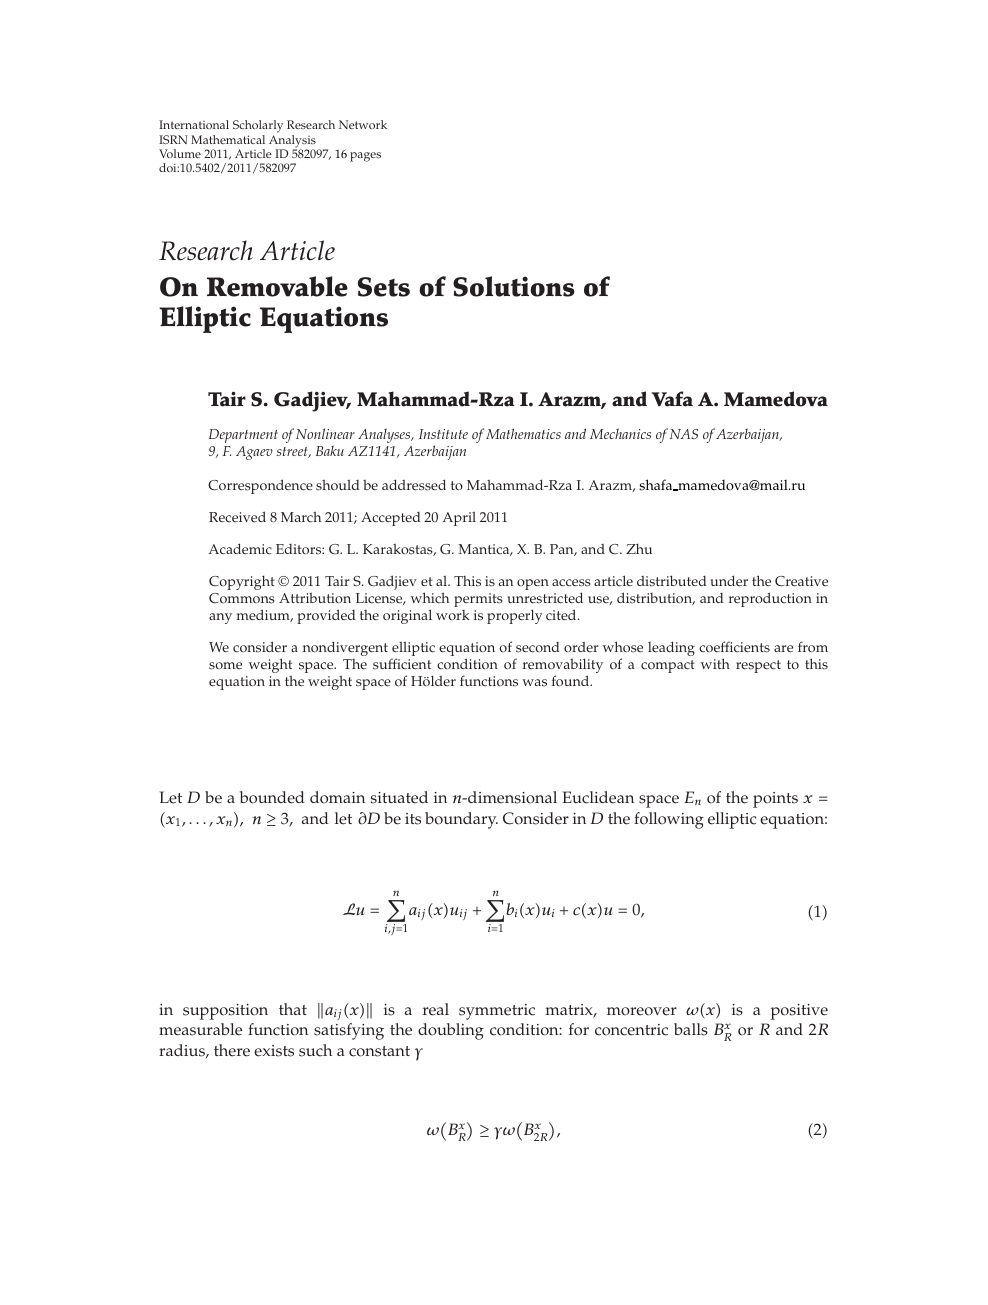 On Removable Sets Of Solutions Of Elliptic Equations Topic Of Research Paper In Mathematics Download Scholarly Article Pdf And Read For Free On Cyberleninka Open Science Hub